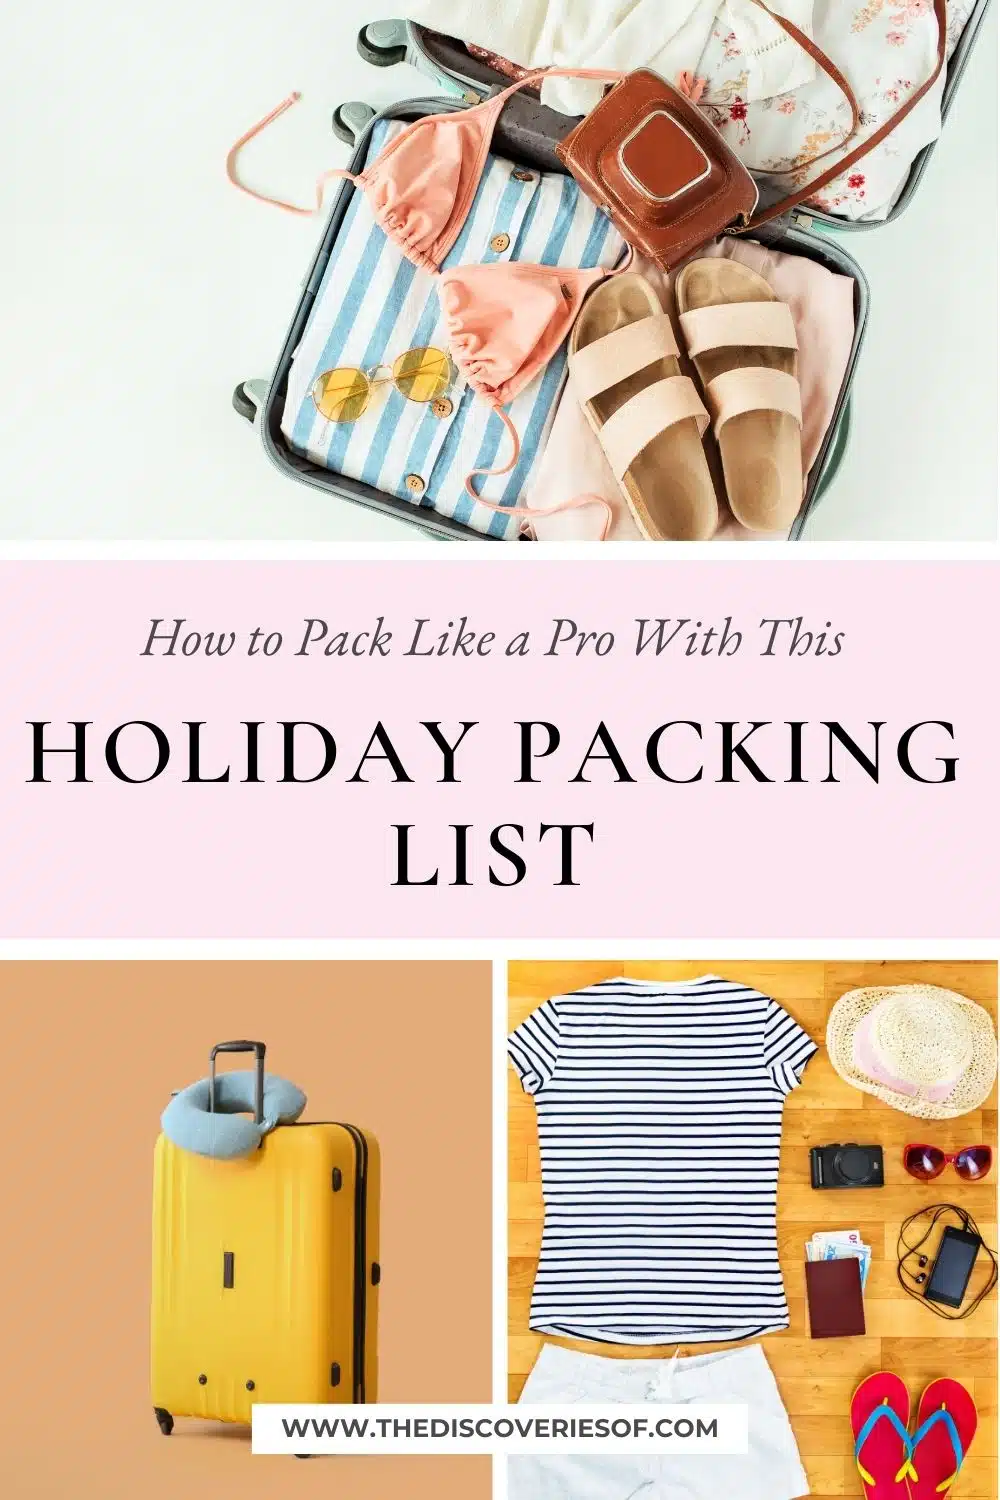 The Ultimate Holiday Packing List To Help You Pack Like A Pro